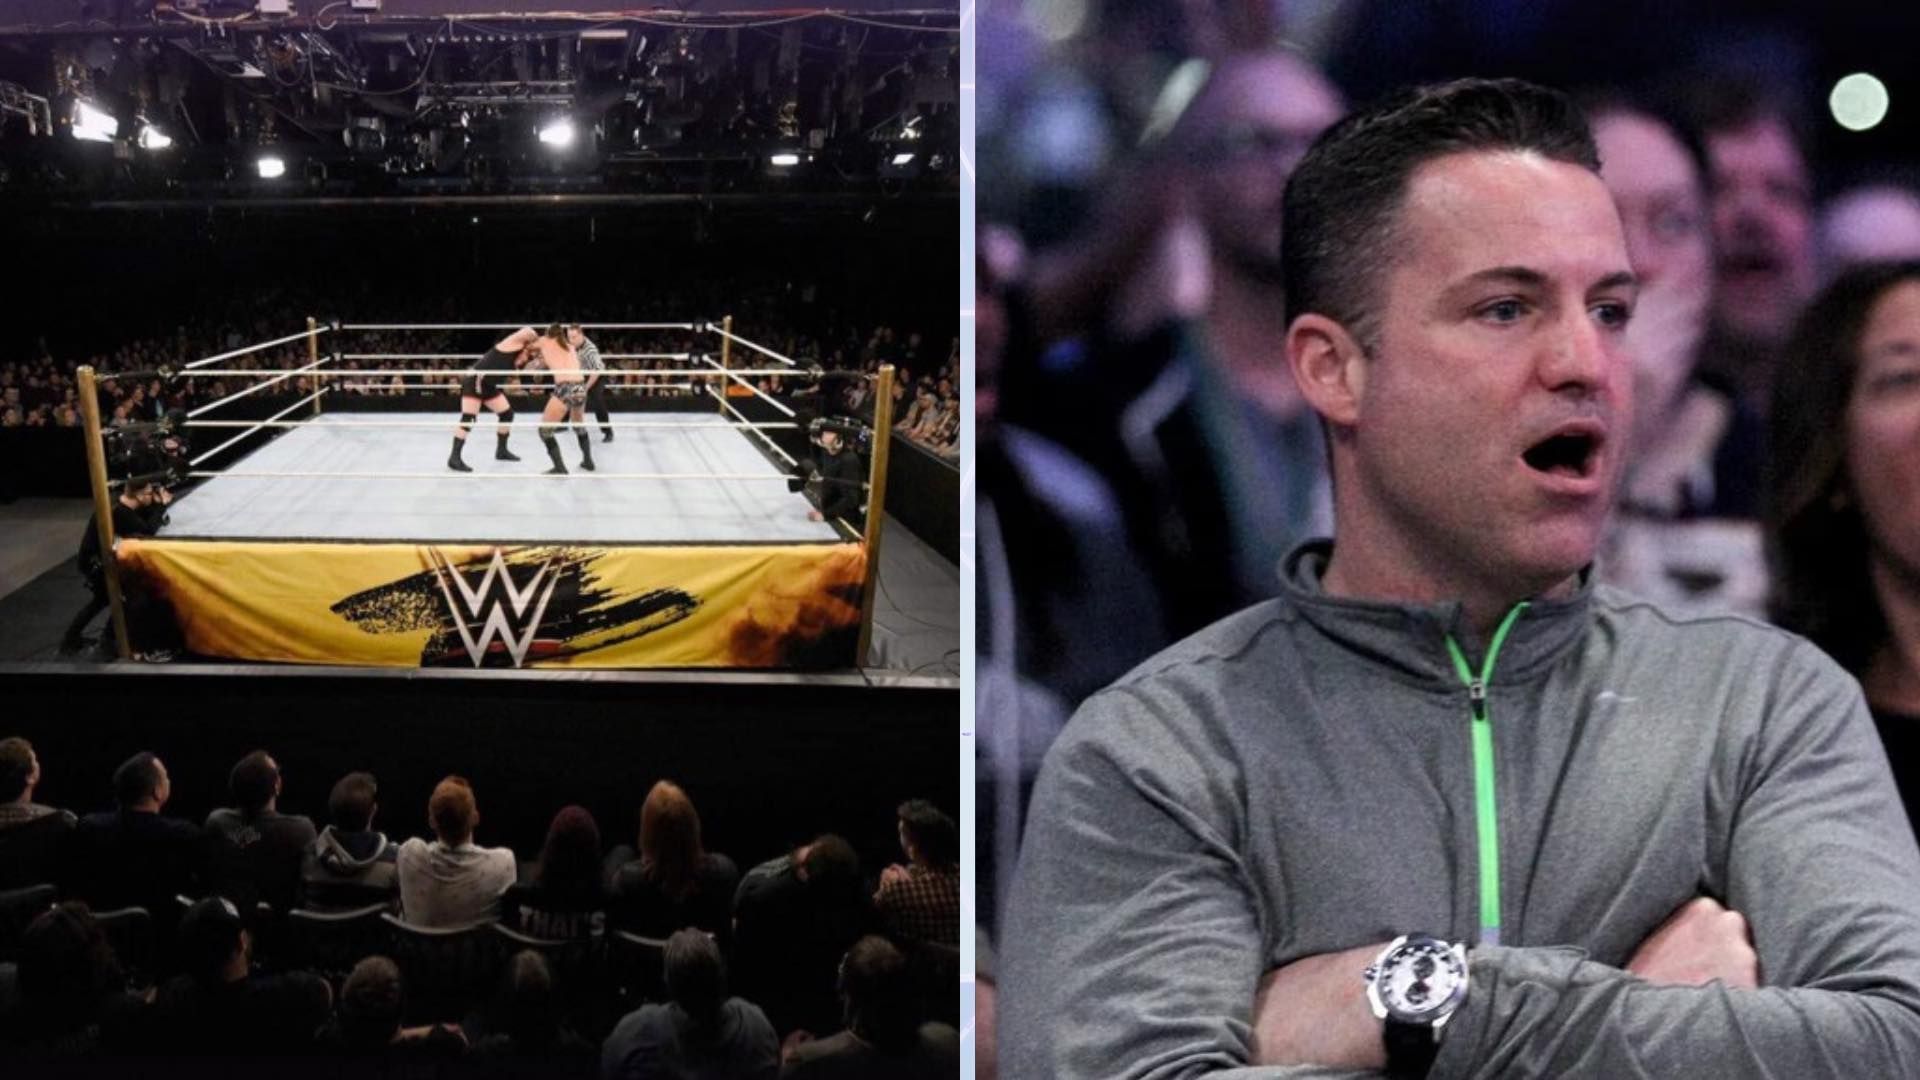 Former WWE champion sent a message at recent show